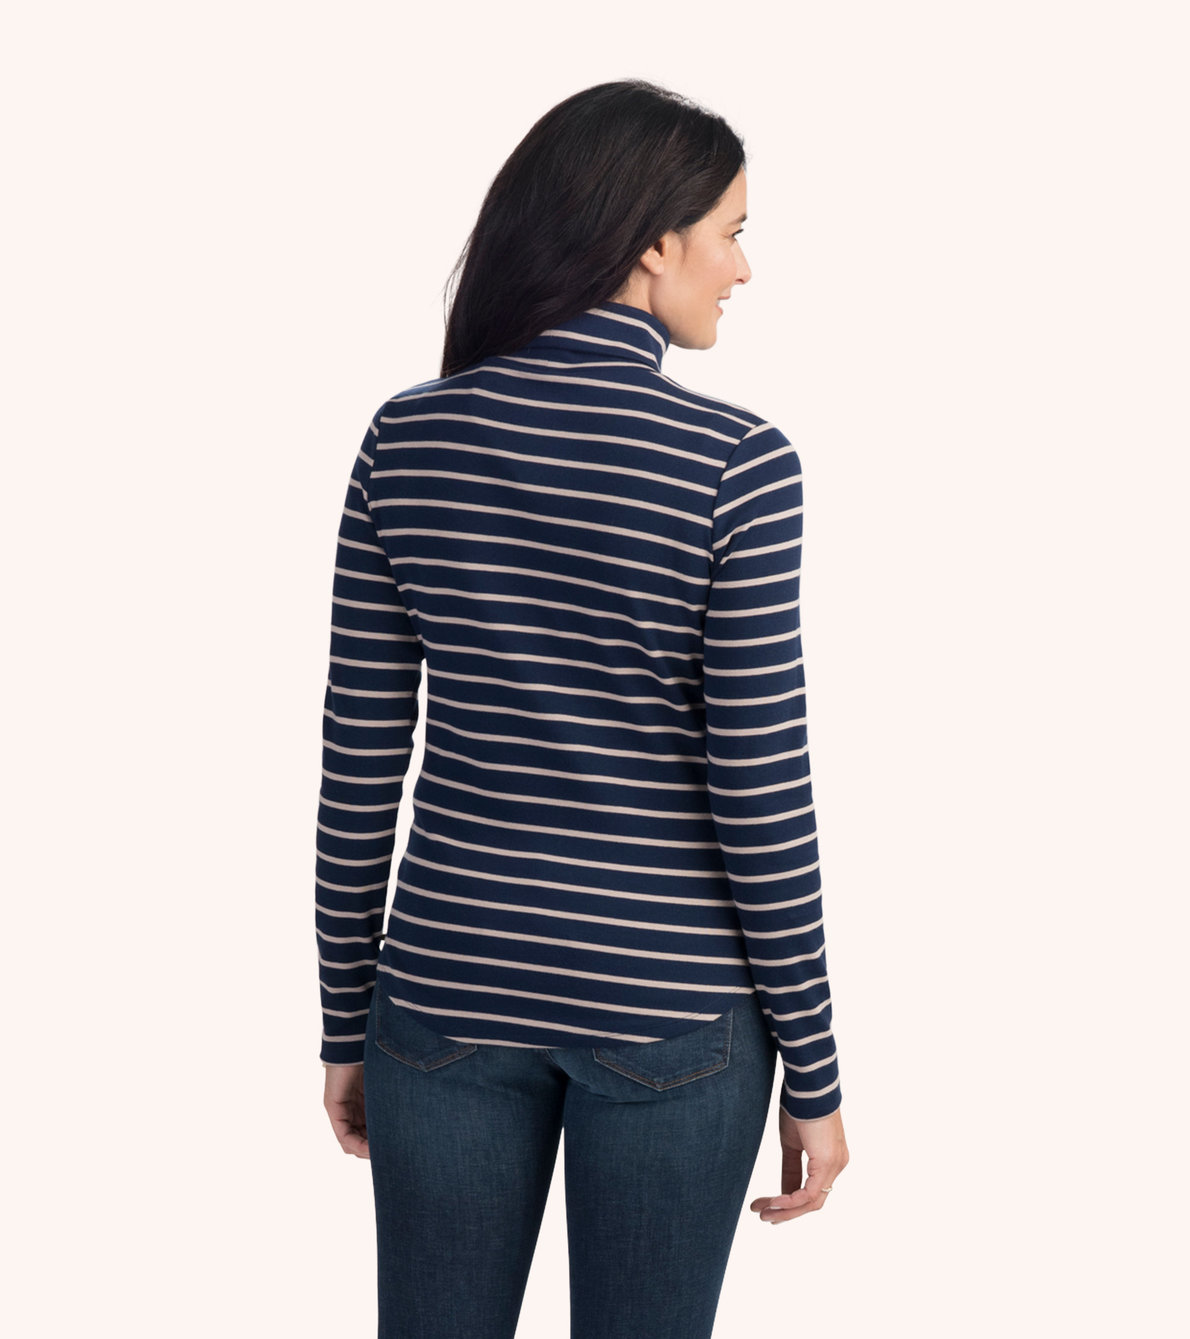 View larger image of Navy and Camel Stripes Turtleneck